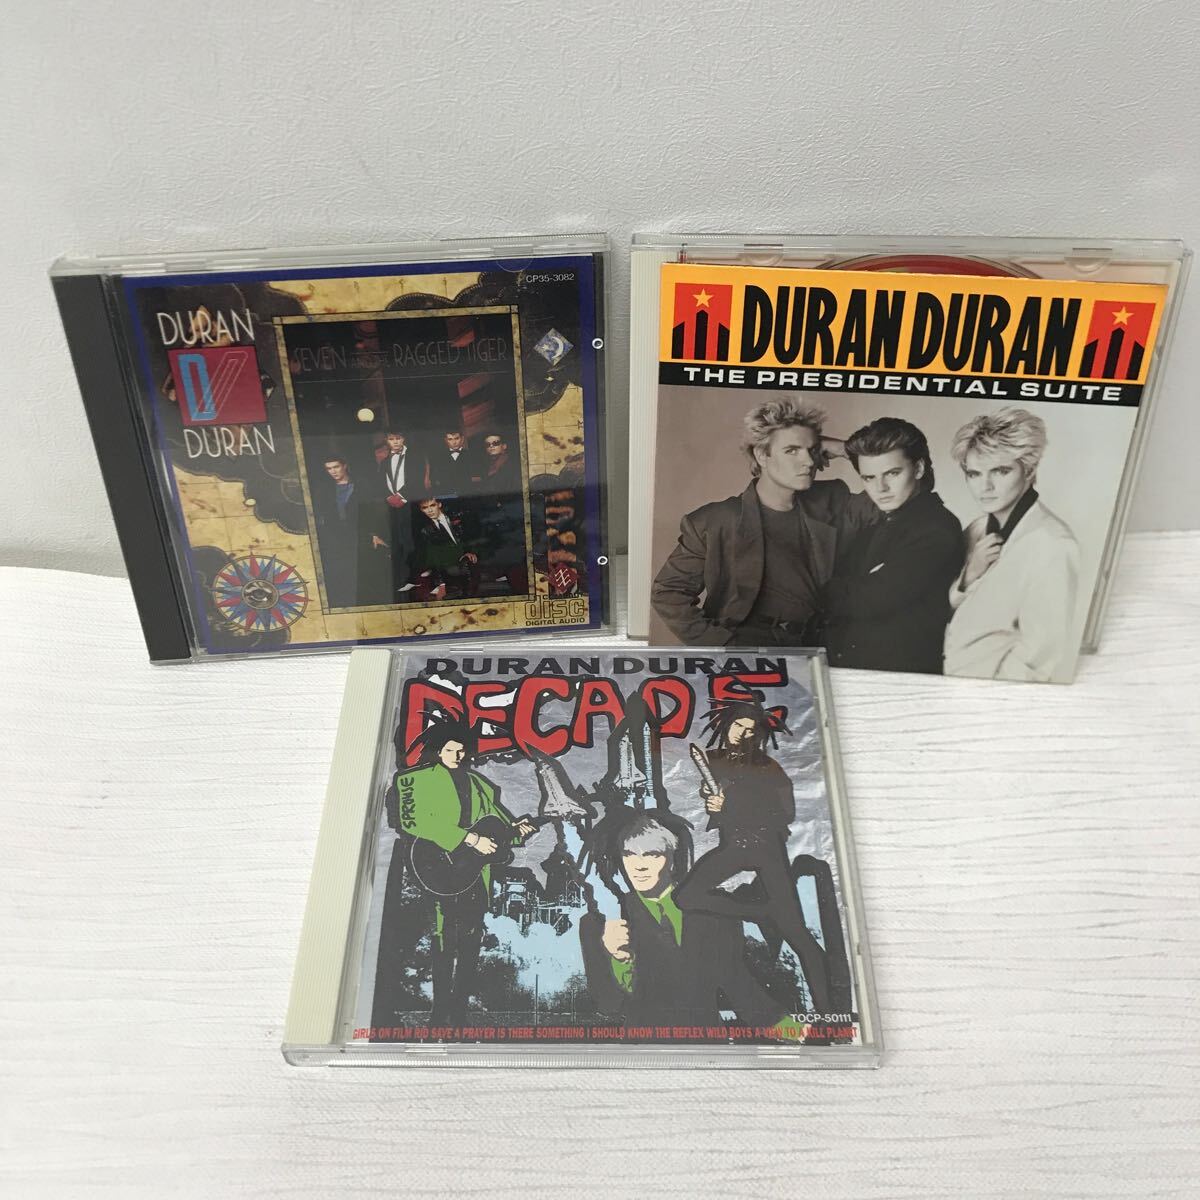 I0413A3 デュラン・デュラン DURAN DURAN CD 6巻セット 音楽 洋楽 / DECADE / SEVEN AND THE RAGGED TIGER / ARENA / BIG THING 他の画像3